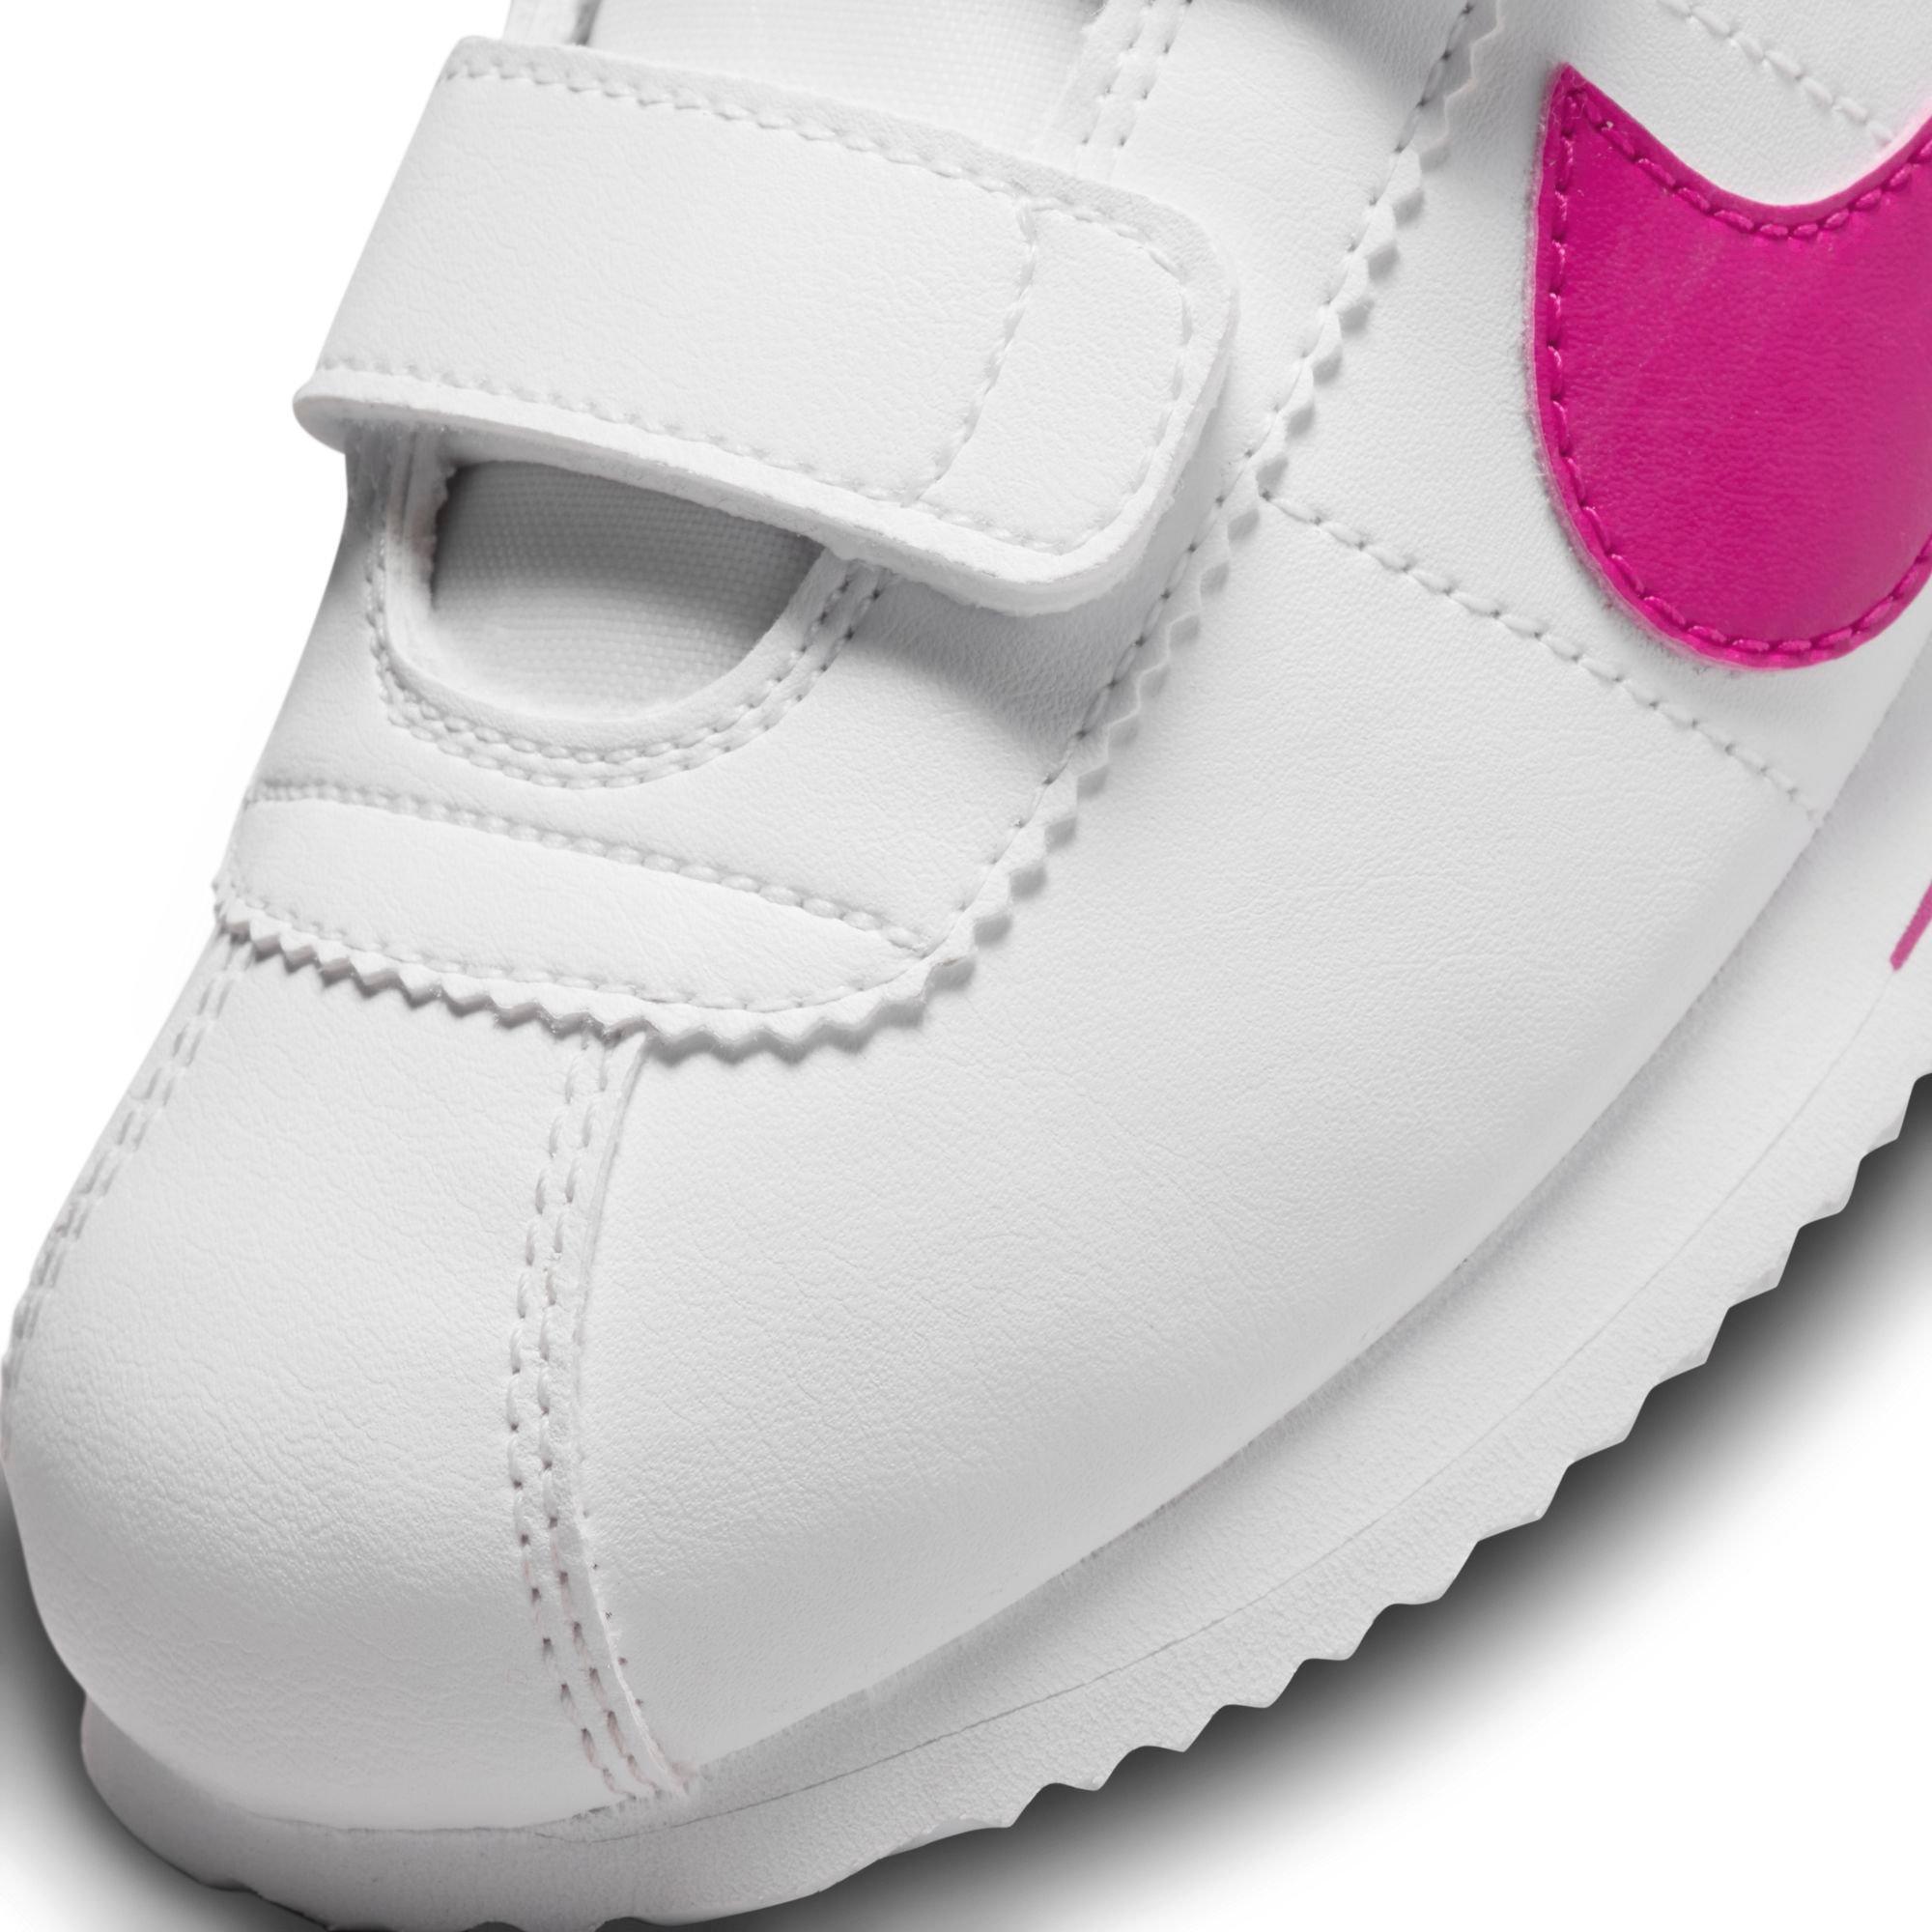 Nike Releases a Summer-Ready Bright Pink Cortez